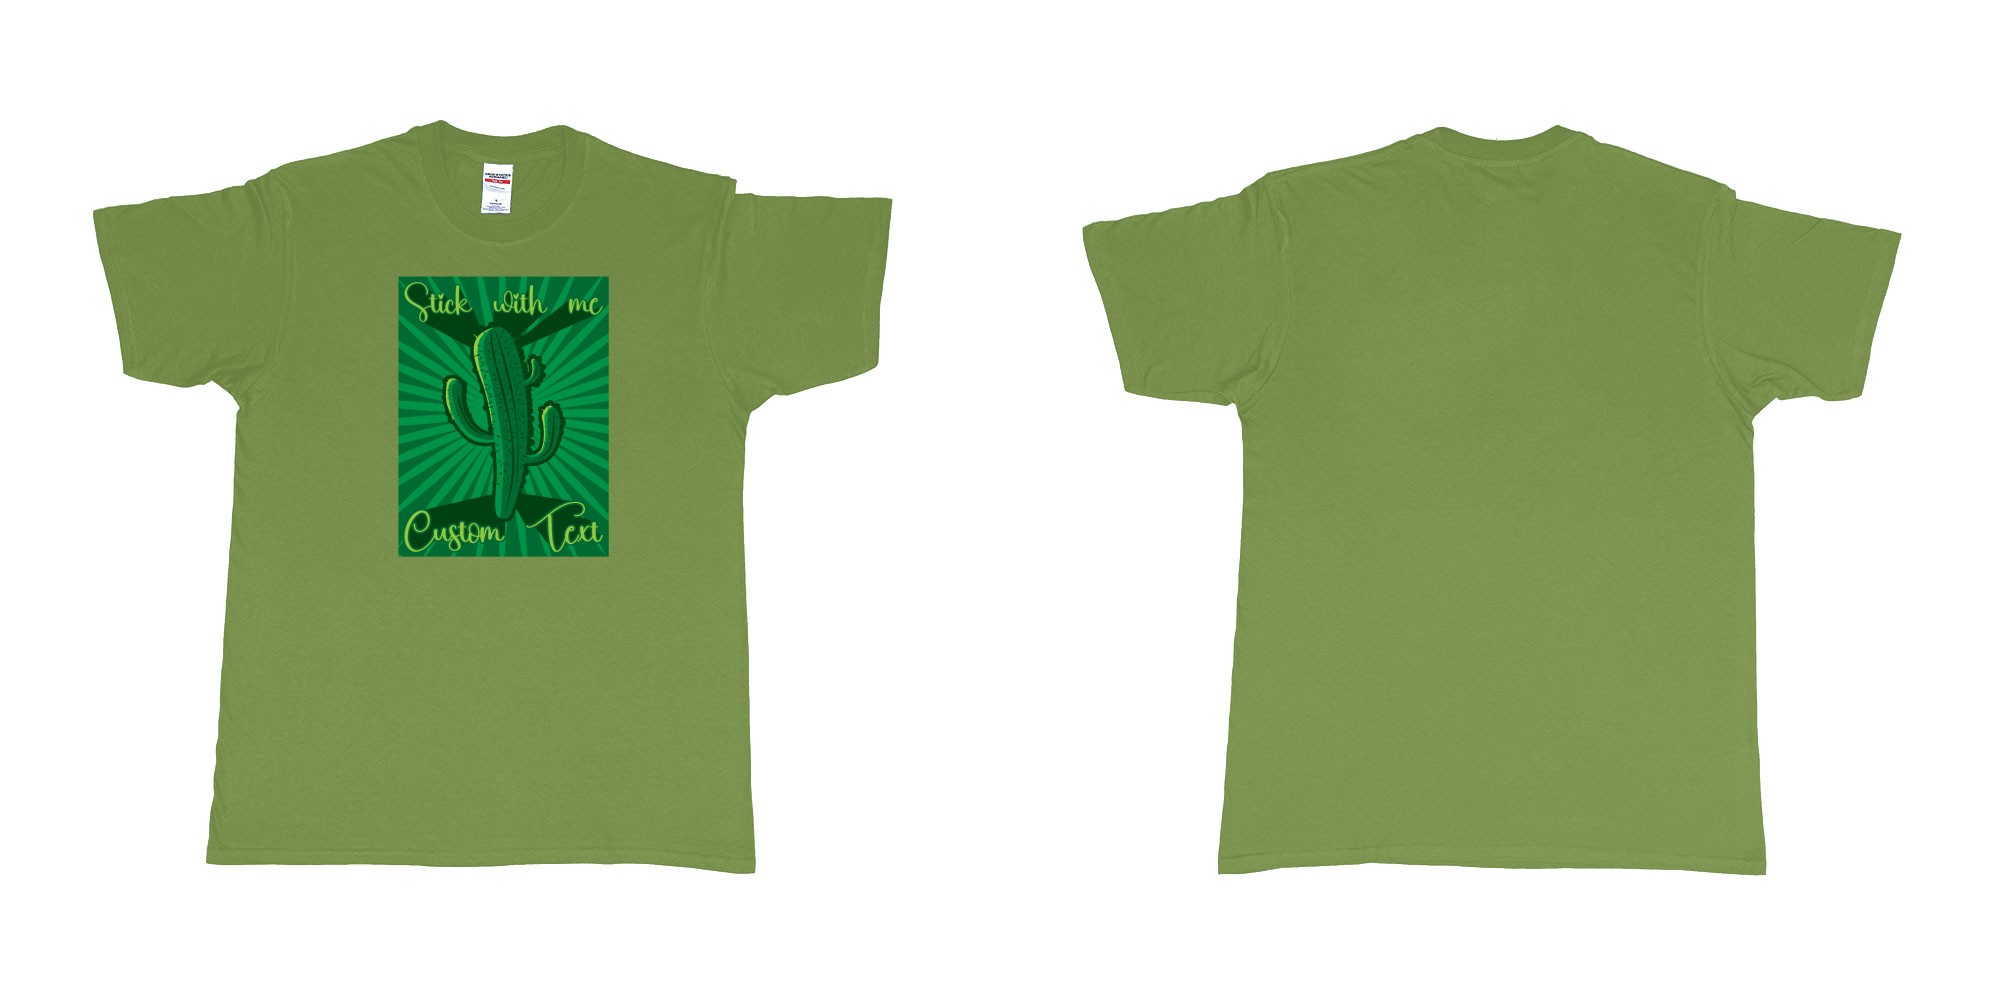 Custom tshirt design cactus stick with me in fabric color military-green choice your own text made in Bali by The Pirate Way